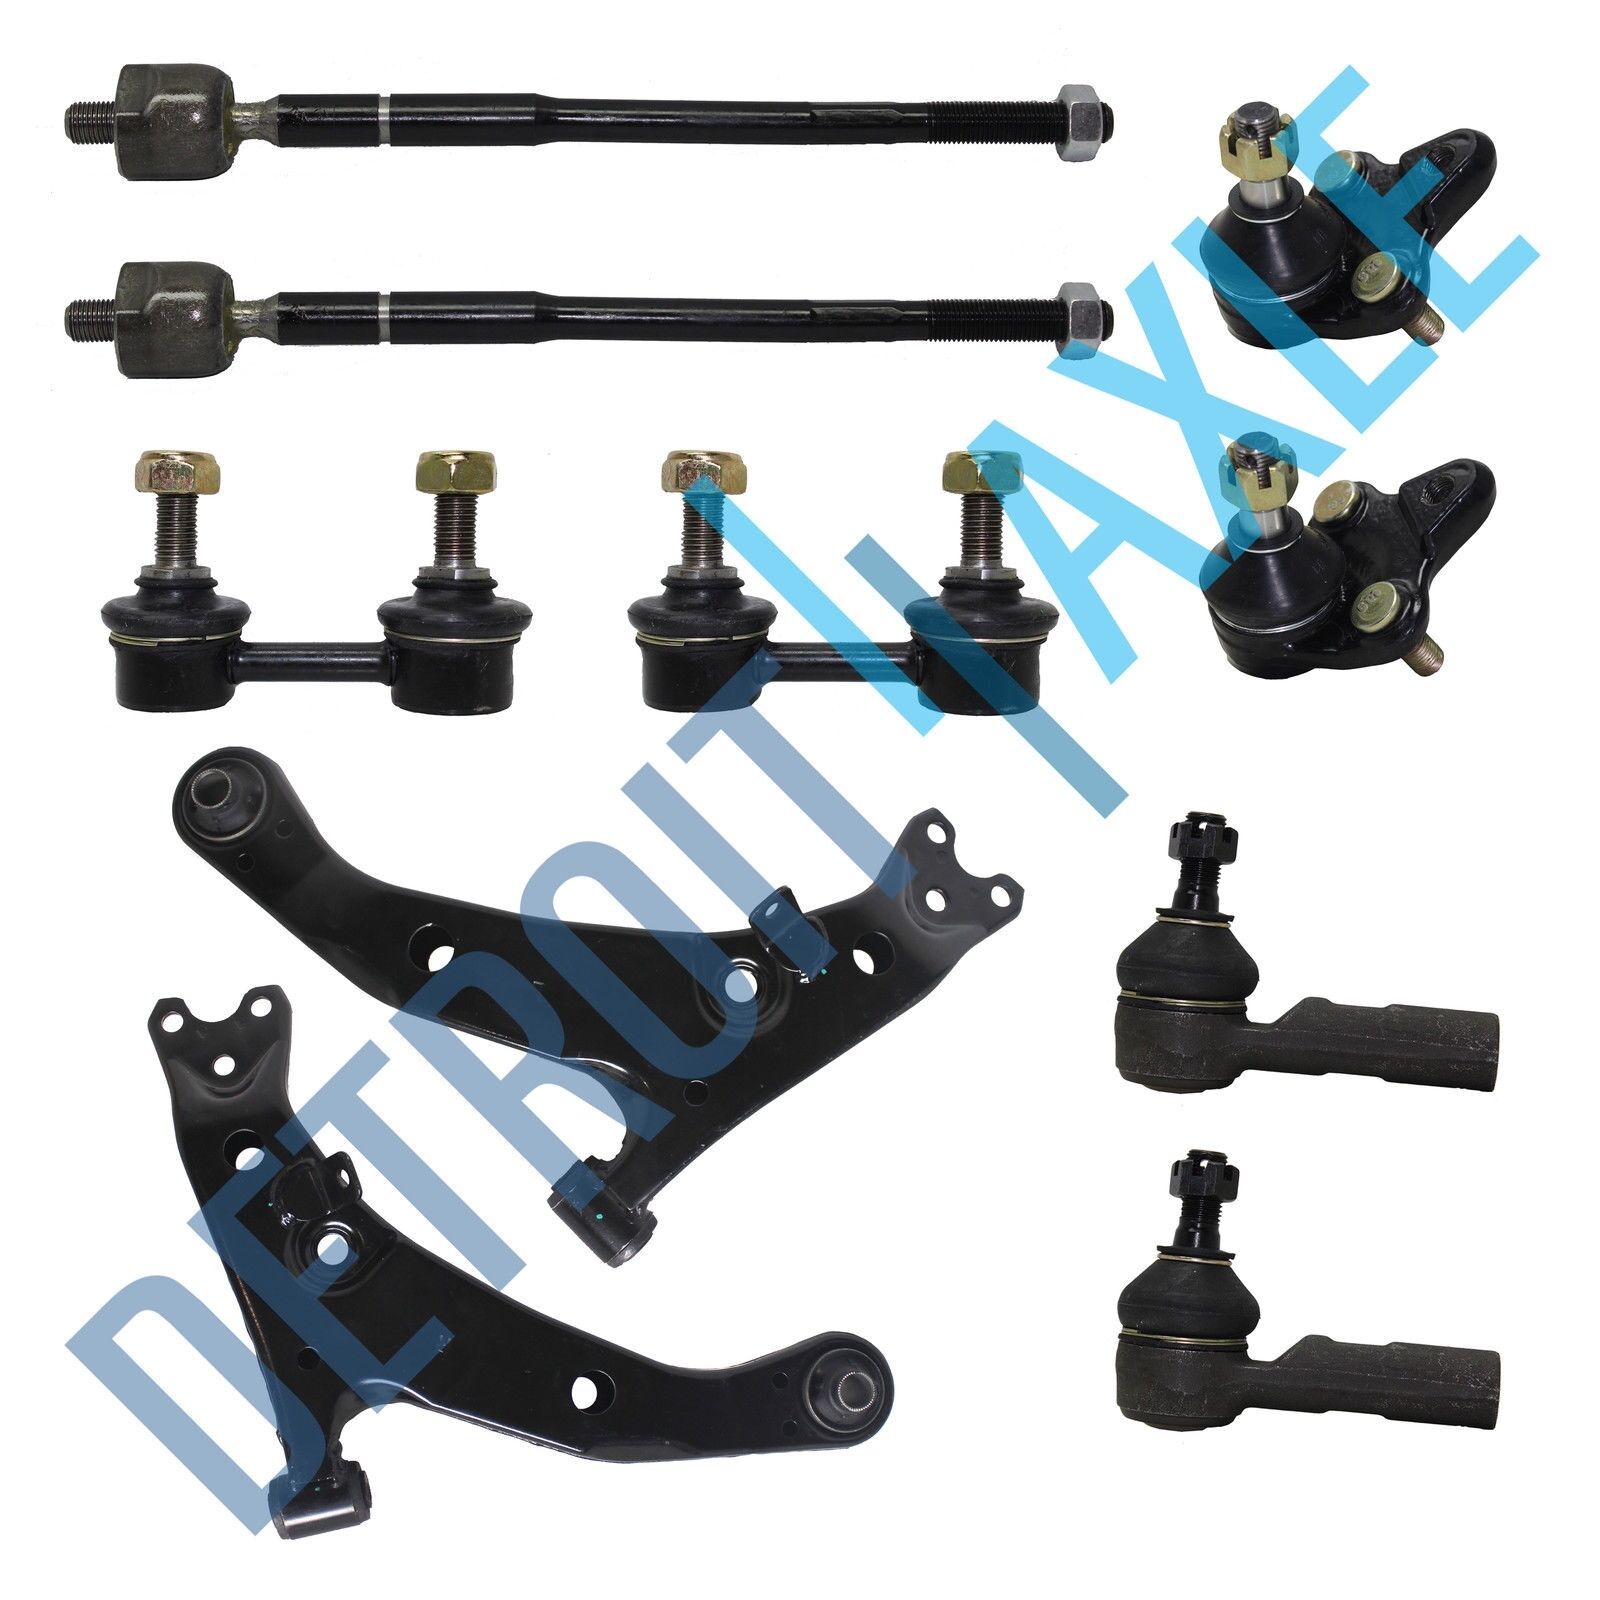 Brand NEW 10pc Complete Front Suspension Kit for Toyota Paseo & Tercel